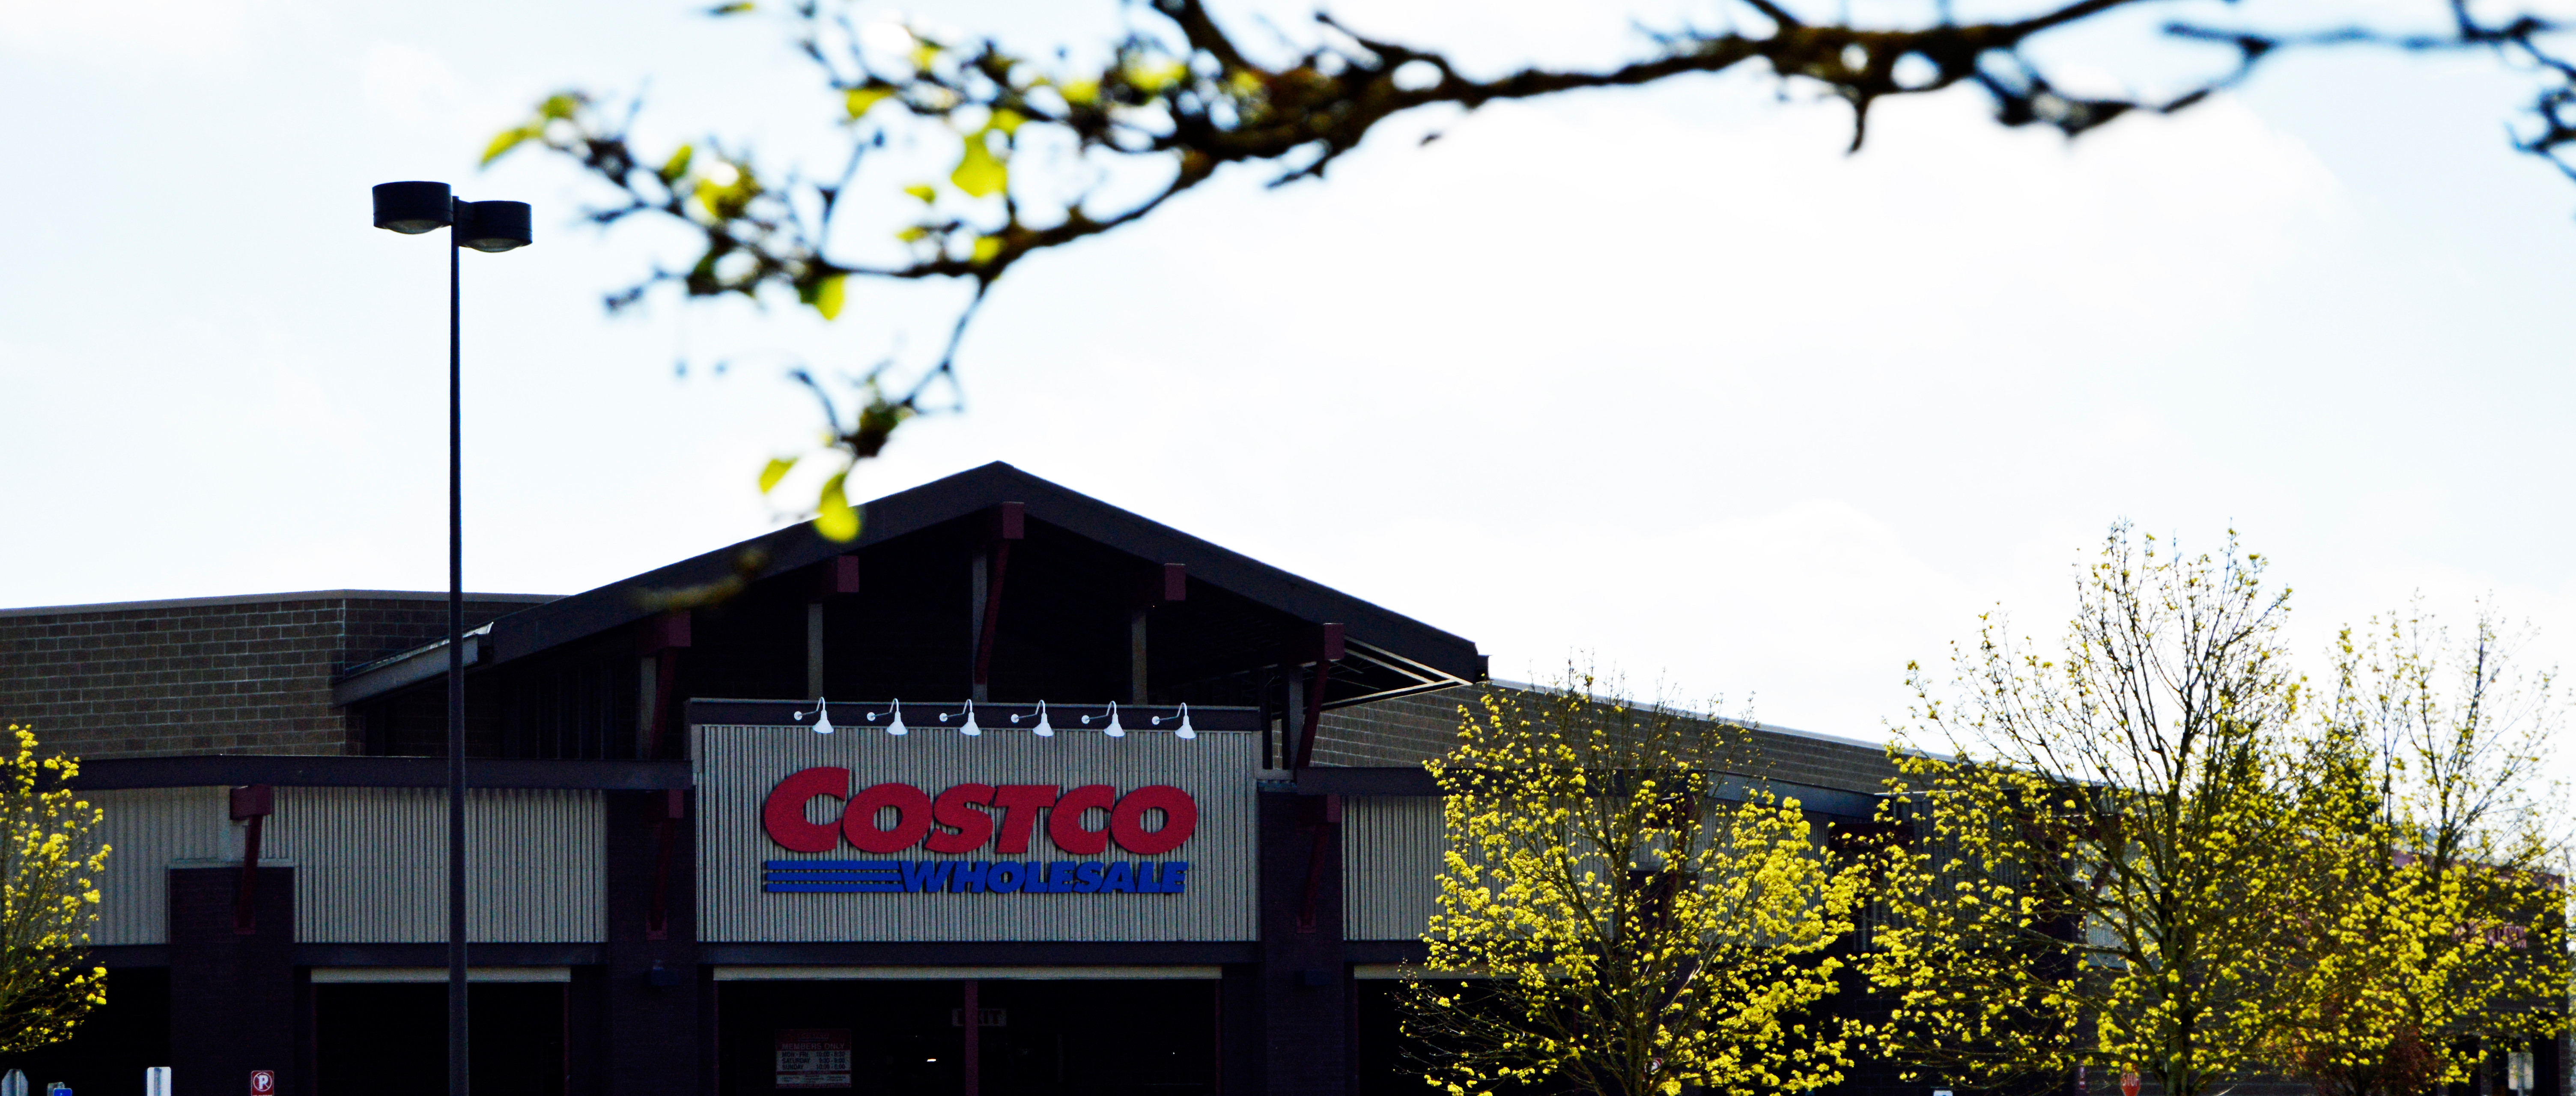 21-costco-wilsonville-oregon-the-kelly-group-real-estate